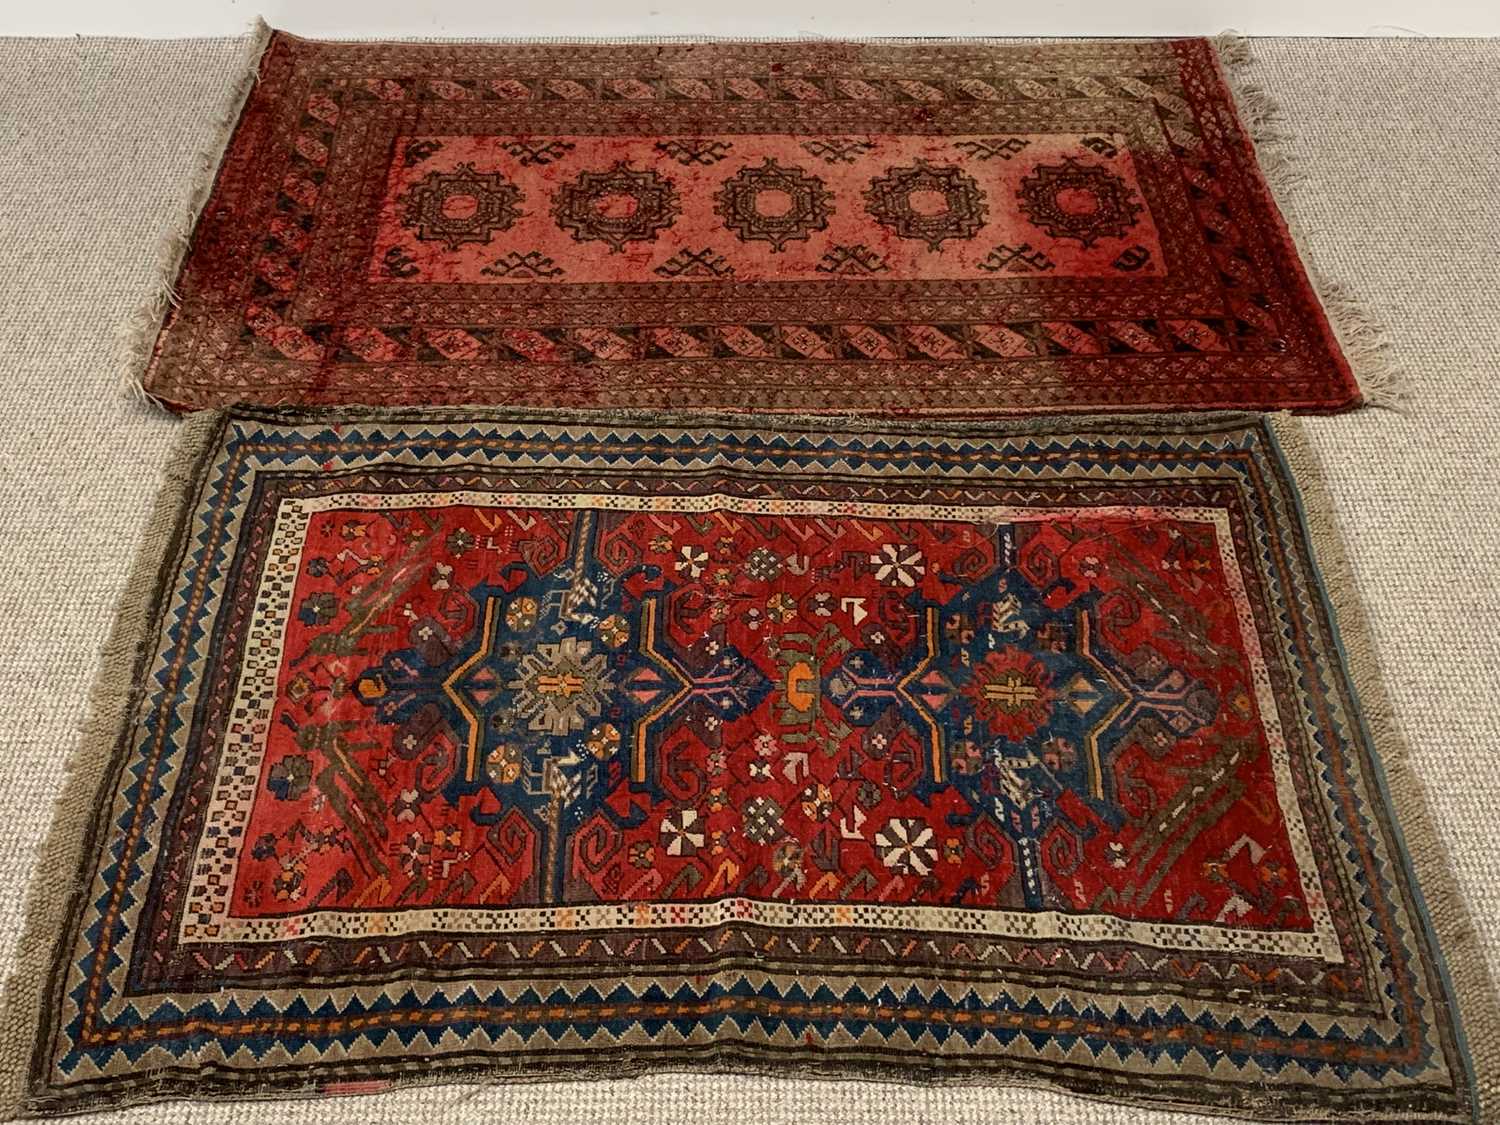 EASTERN TYPE WOOLLEN RUGS (2), red ground with repeating central patterns and multiple bordered